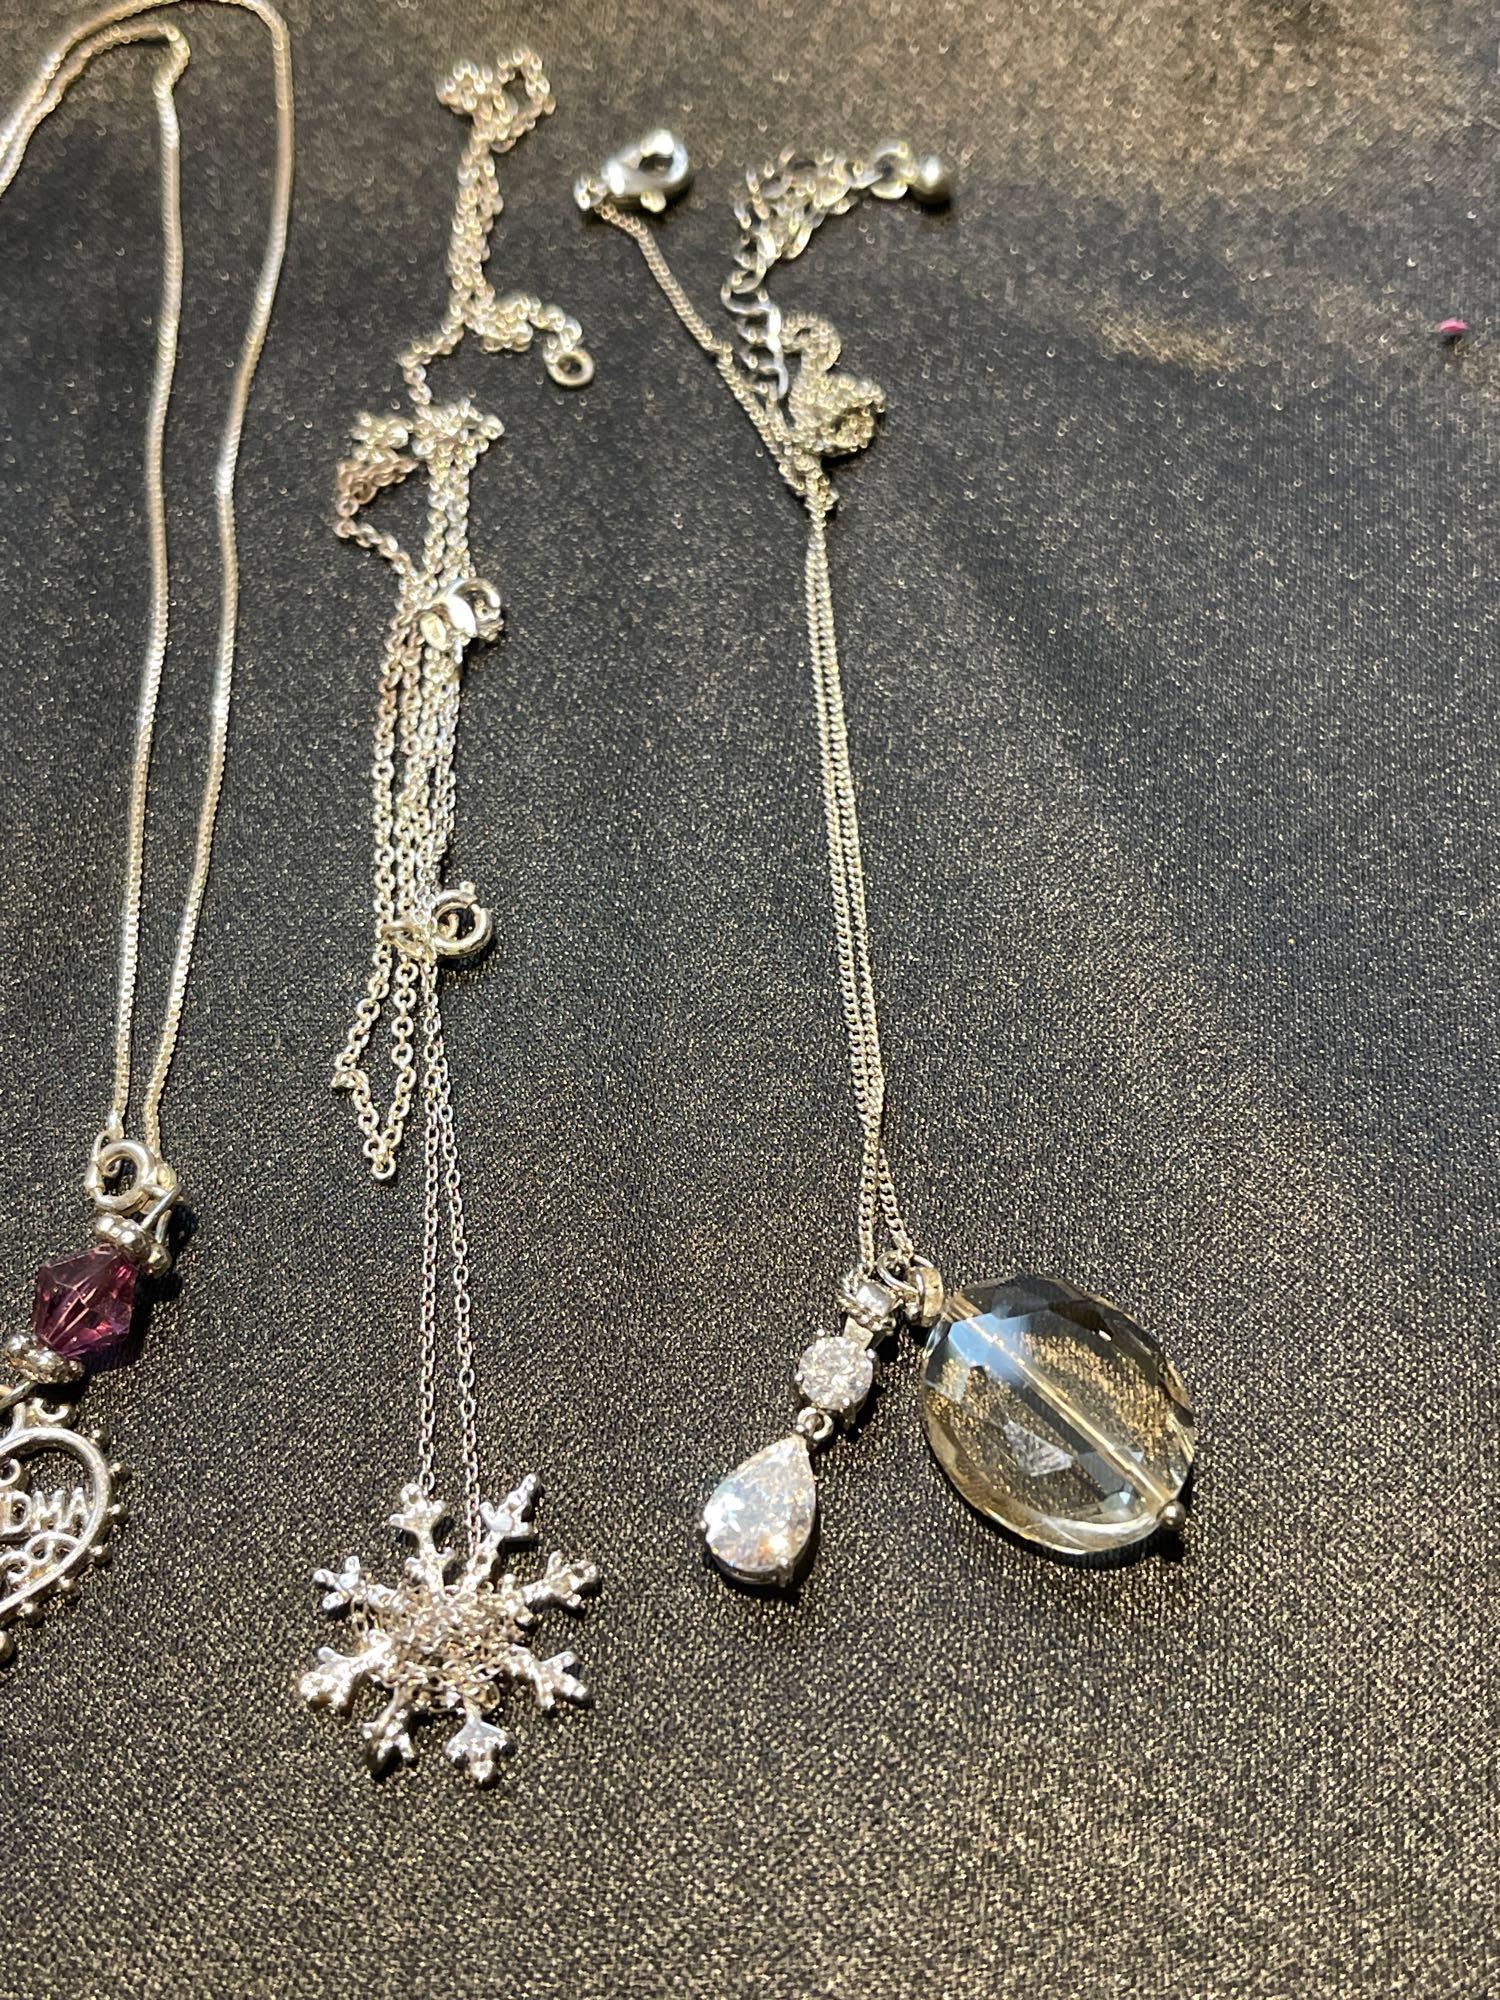 Nice Silver Necklaces with pendants, including Grandma